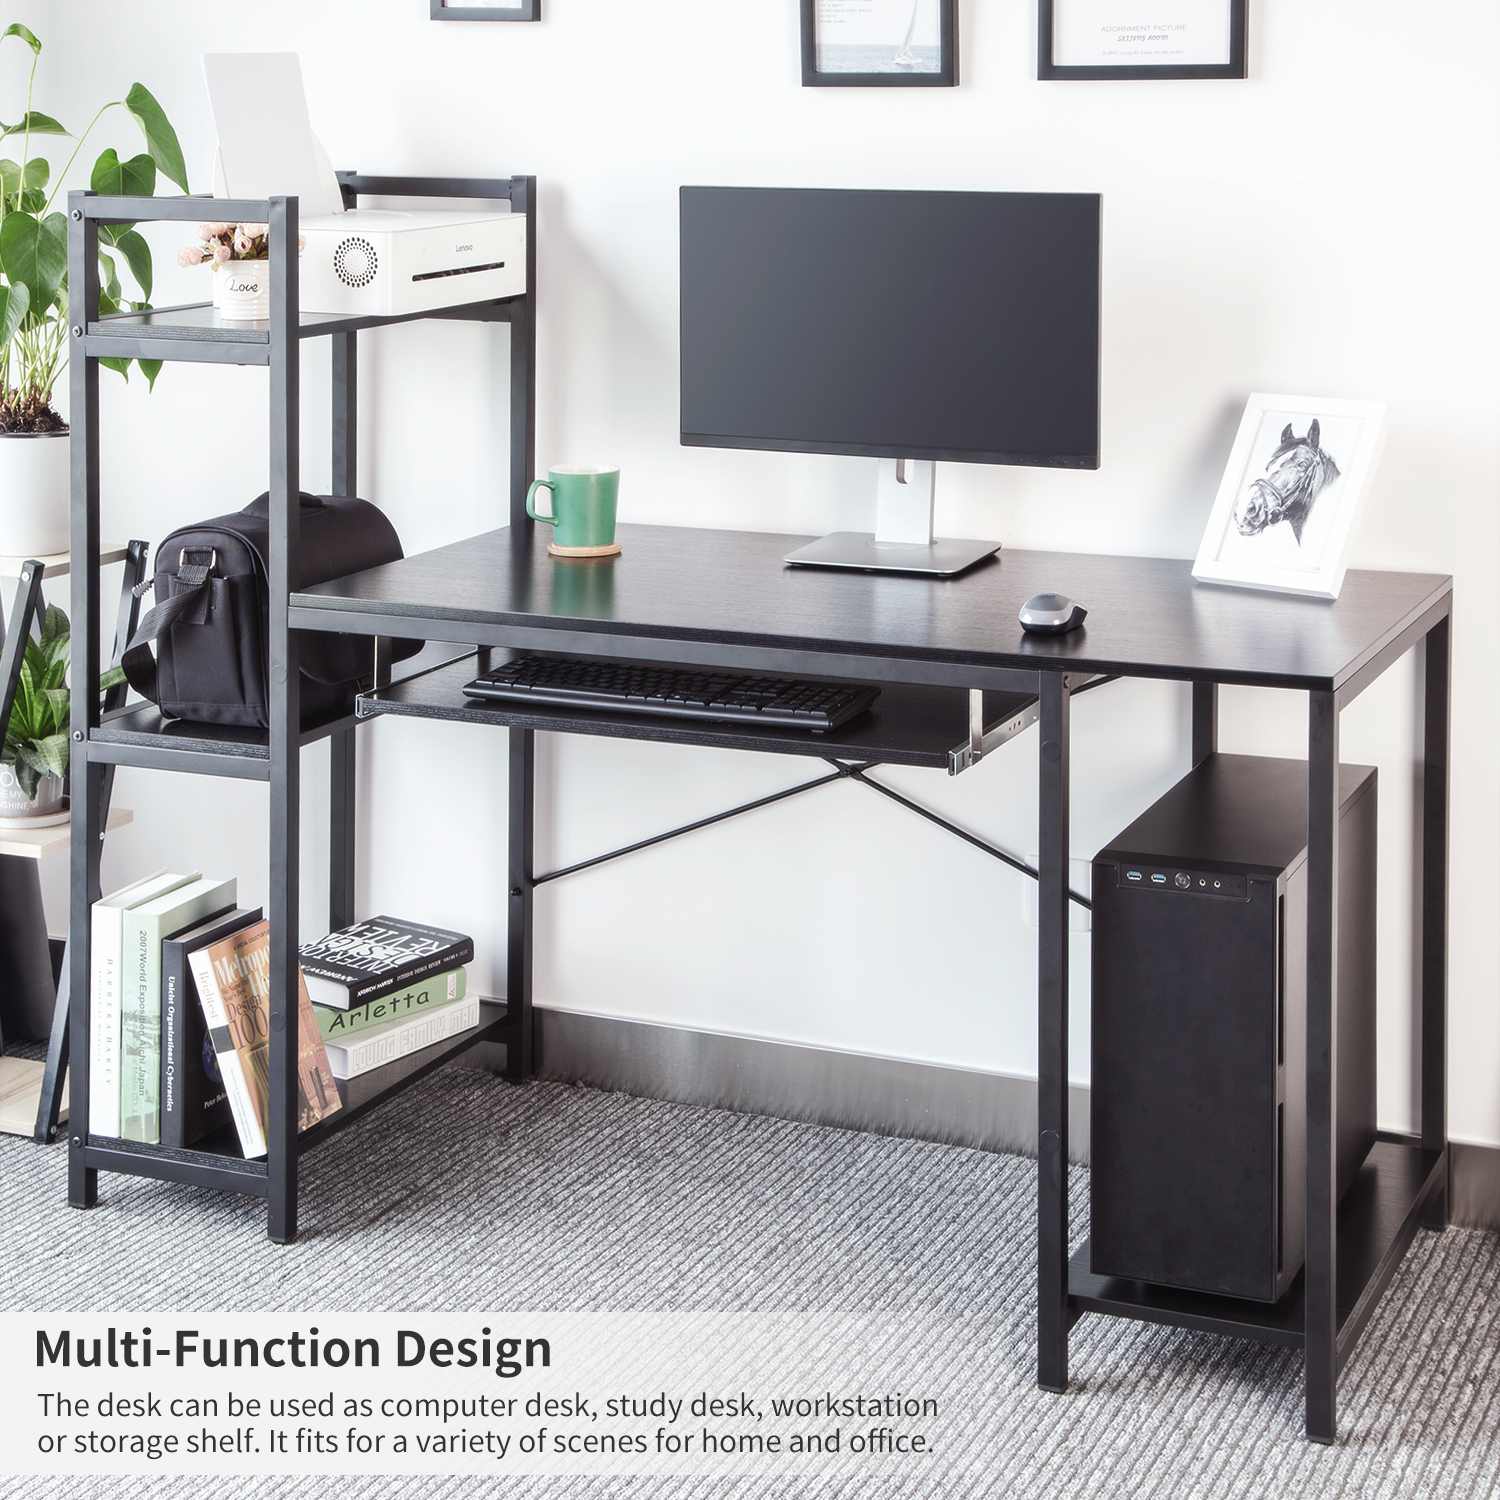 TOPSKY Computer Desk 59”Large Desktop Surface with Additional 3-Tier Bookshelves, 1-Tier Storage Shelf and Keyboard Tray for Office